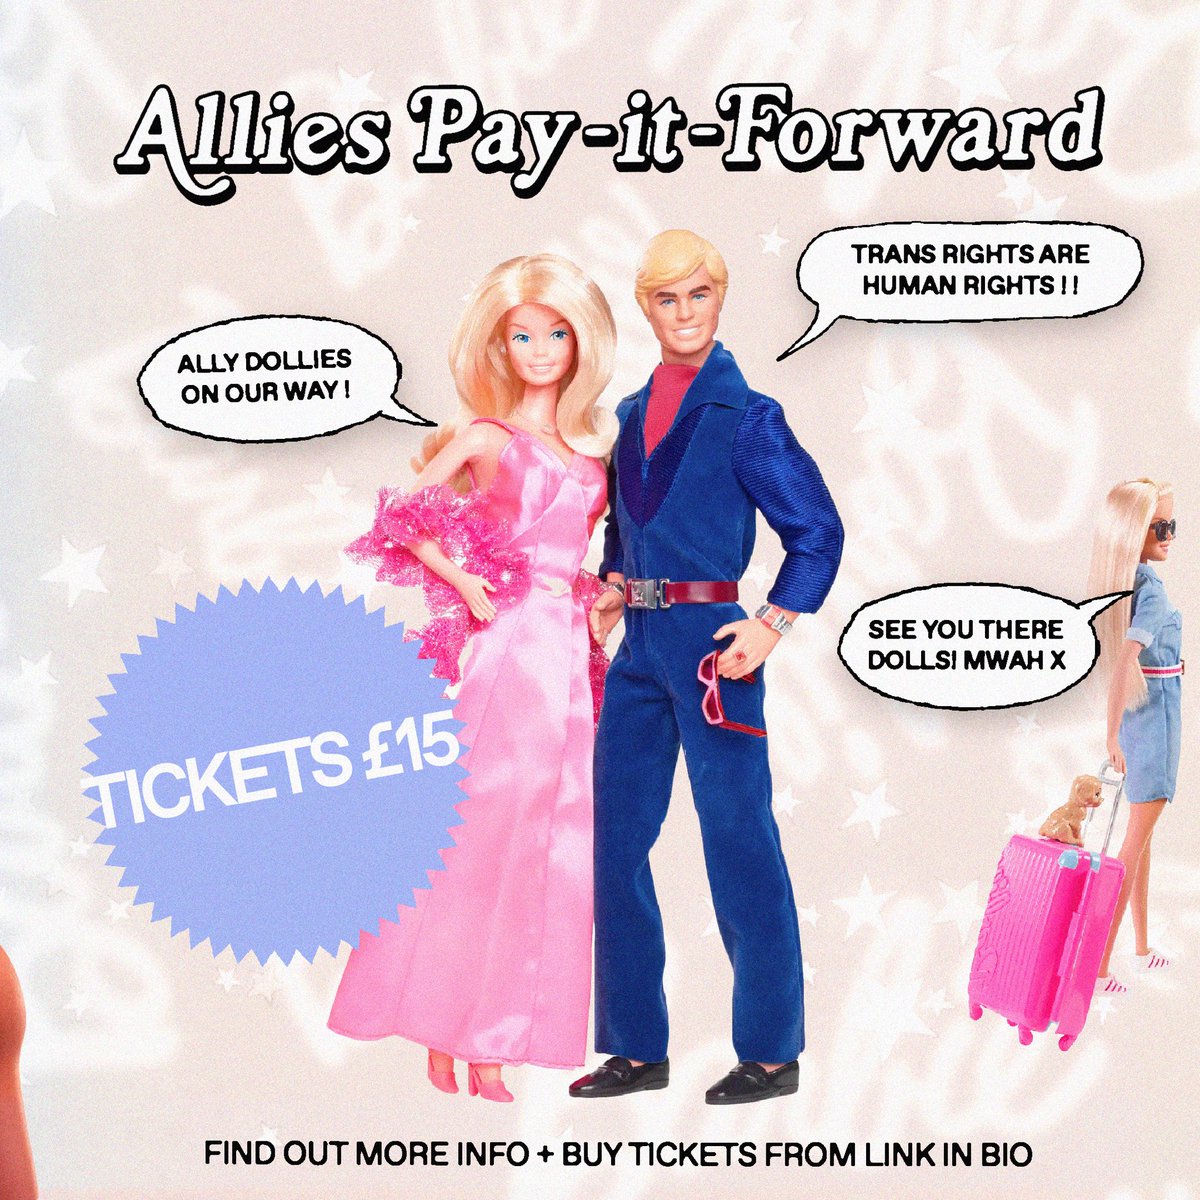 Ally pay it forward tickets, £15!! The more allies, the more dolls go free !! drain ur wallet if u luv the dolls 💋💰👨‍👩‍👧‍👦